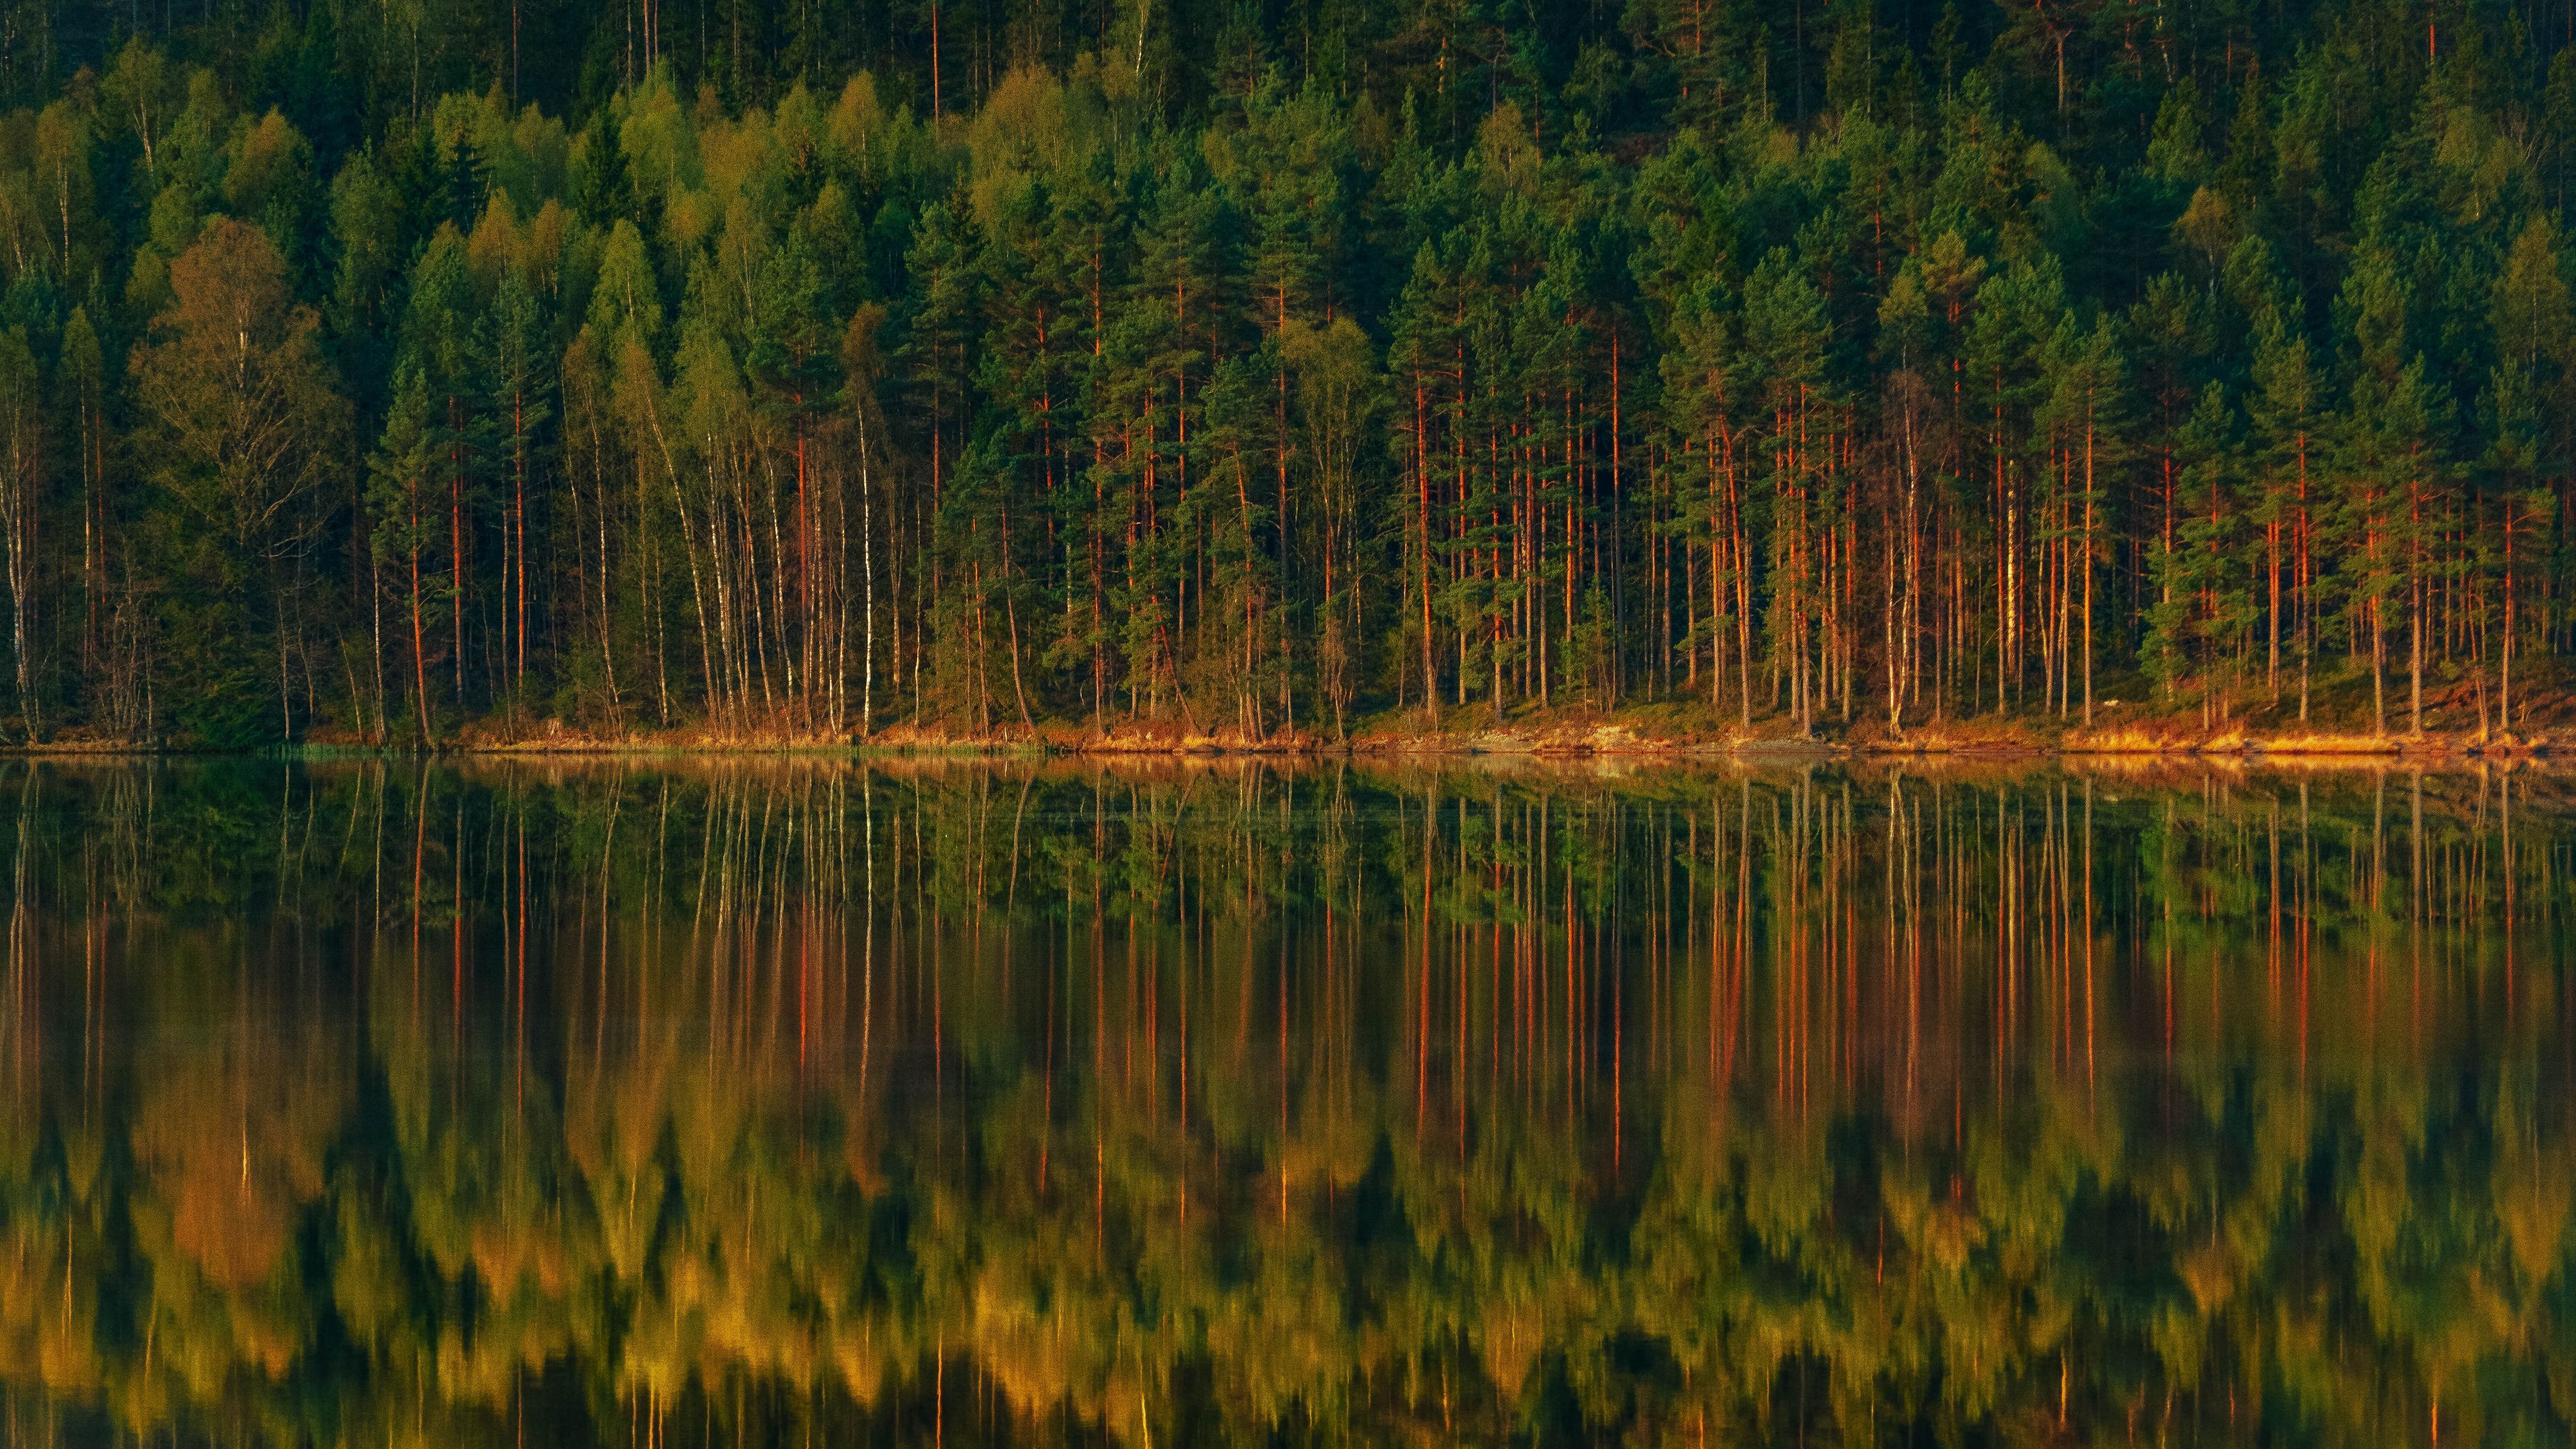 Download wallpaper 3840x2160 lake, forest, reflection, trees, shore, landscape 4k uhd 16:9 HD background